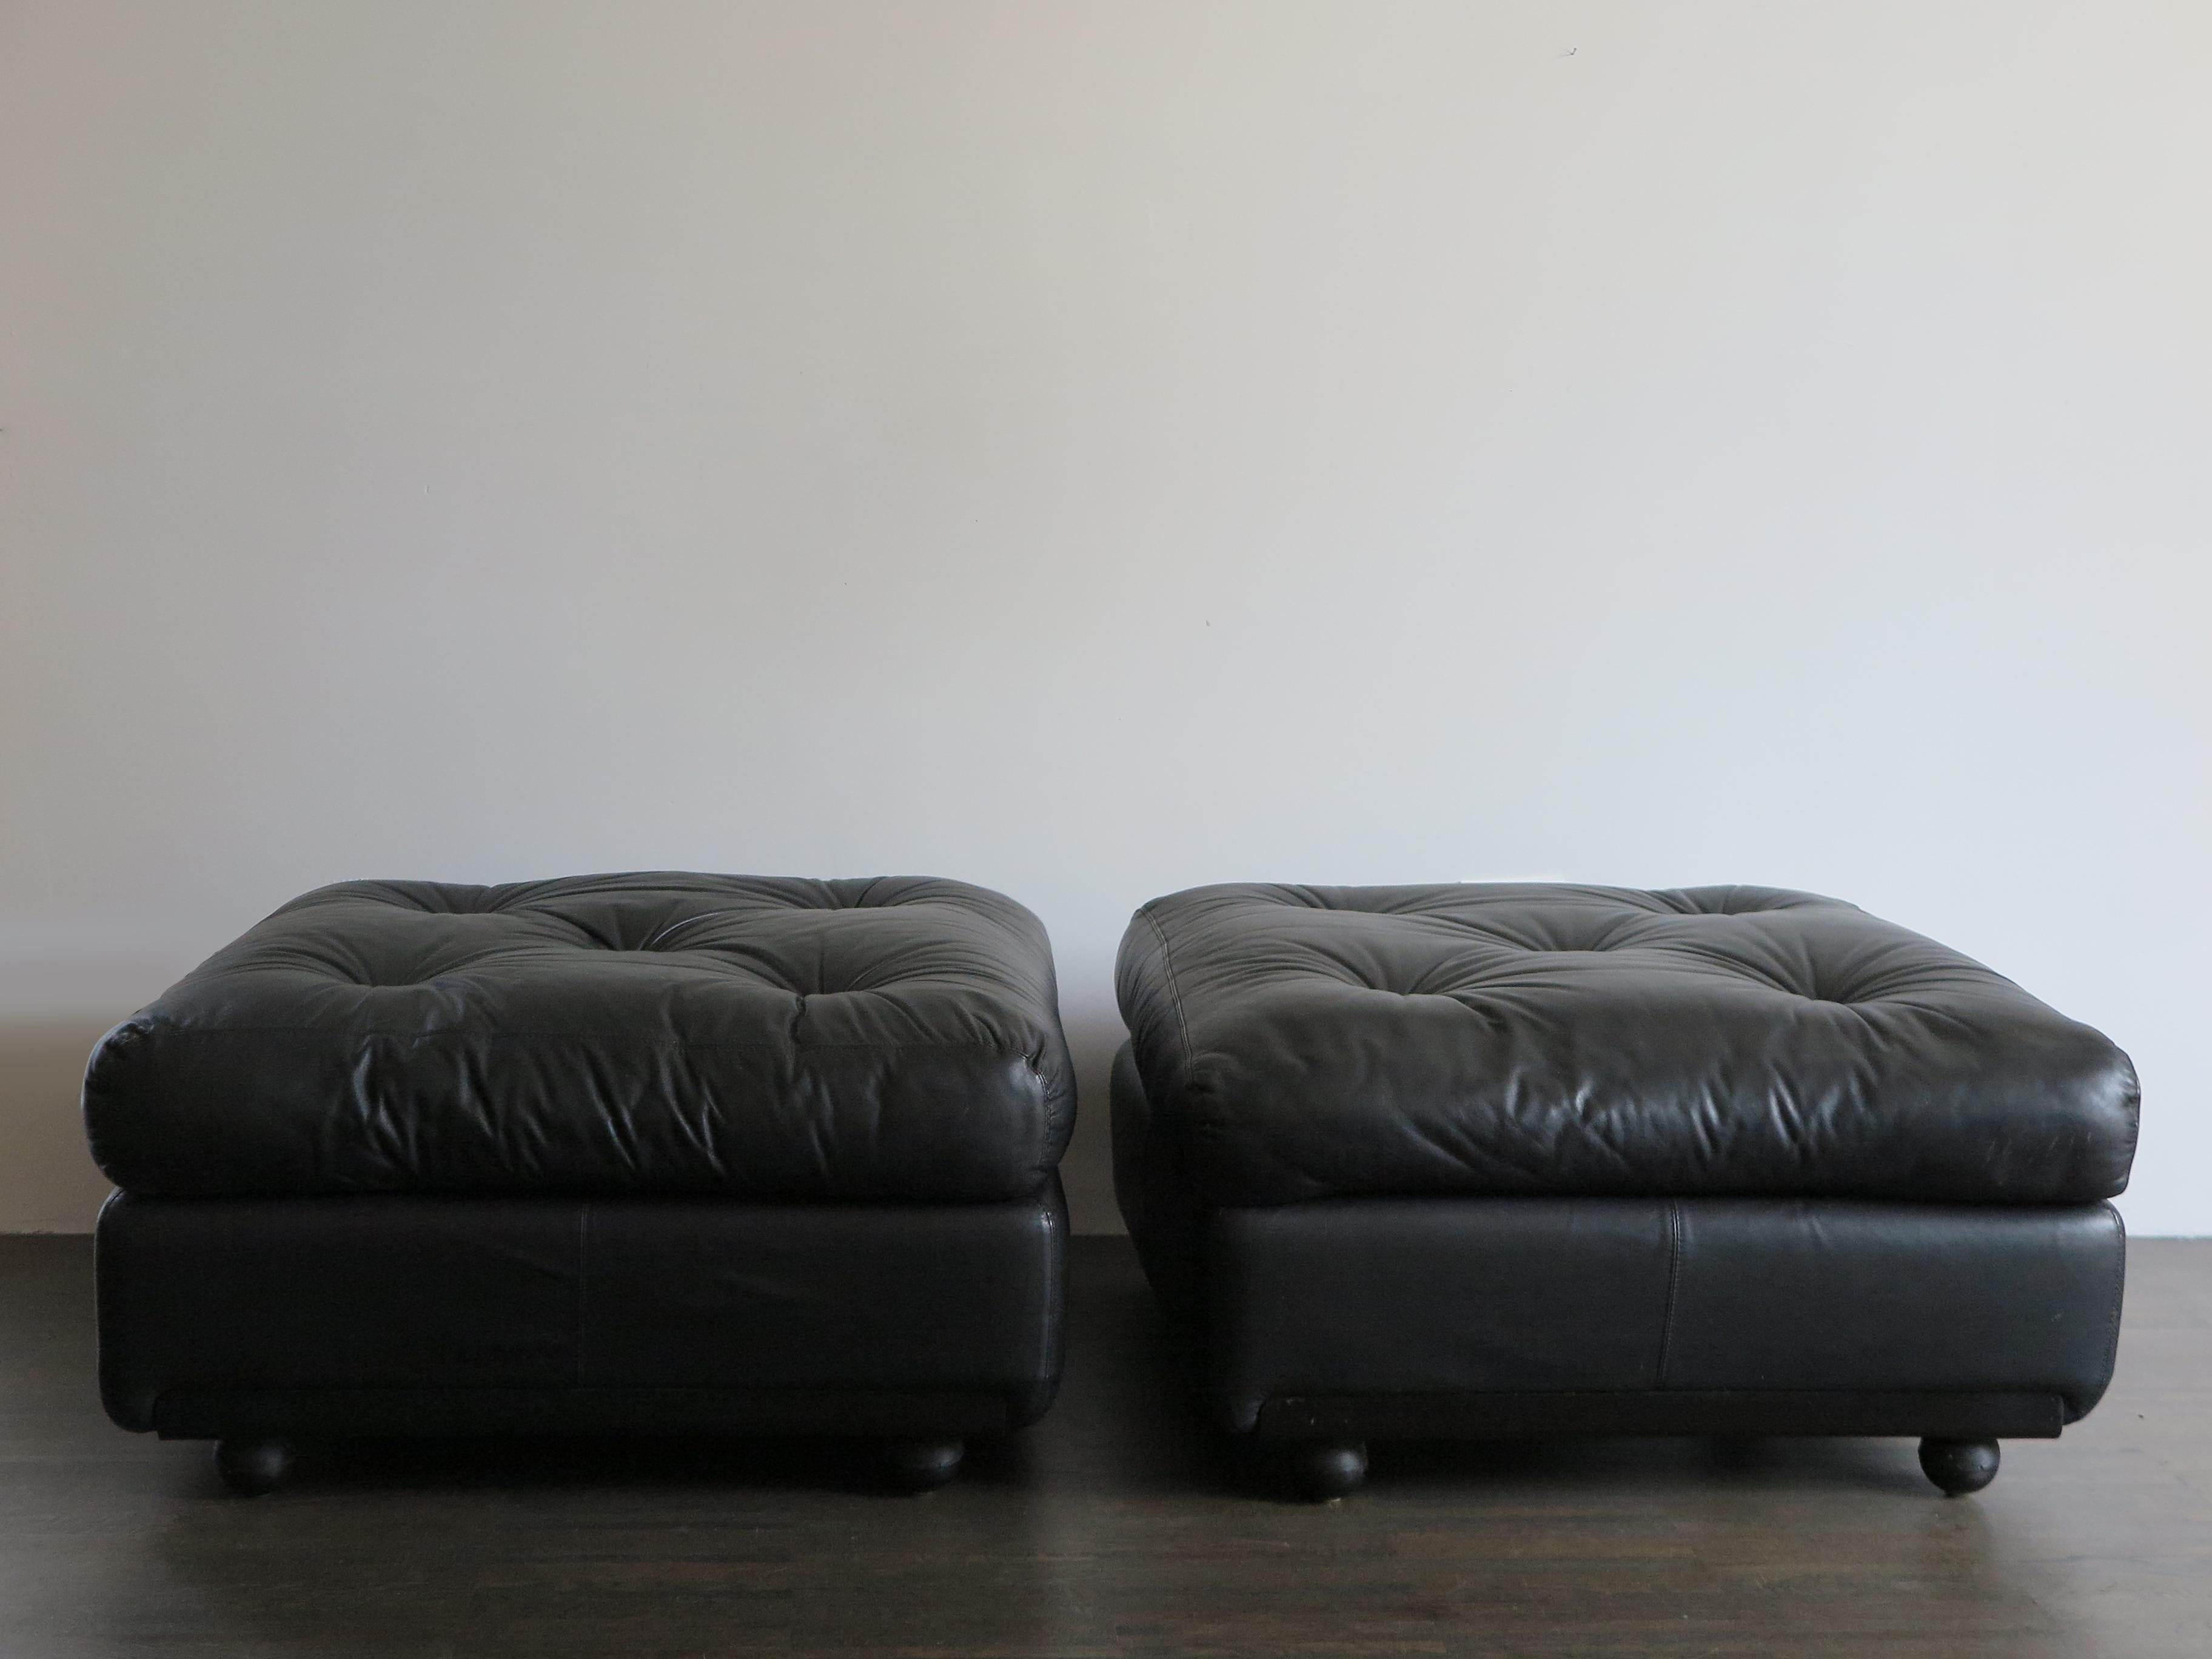 Couple of Italian poufs model Amanta designed by Mario Bellini and produced by B&B Italia with black original leather cushions and upholstery, label and relief print, circa 1970s

Please note that the items are original of the period and this